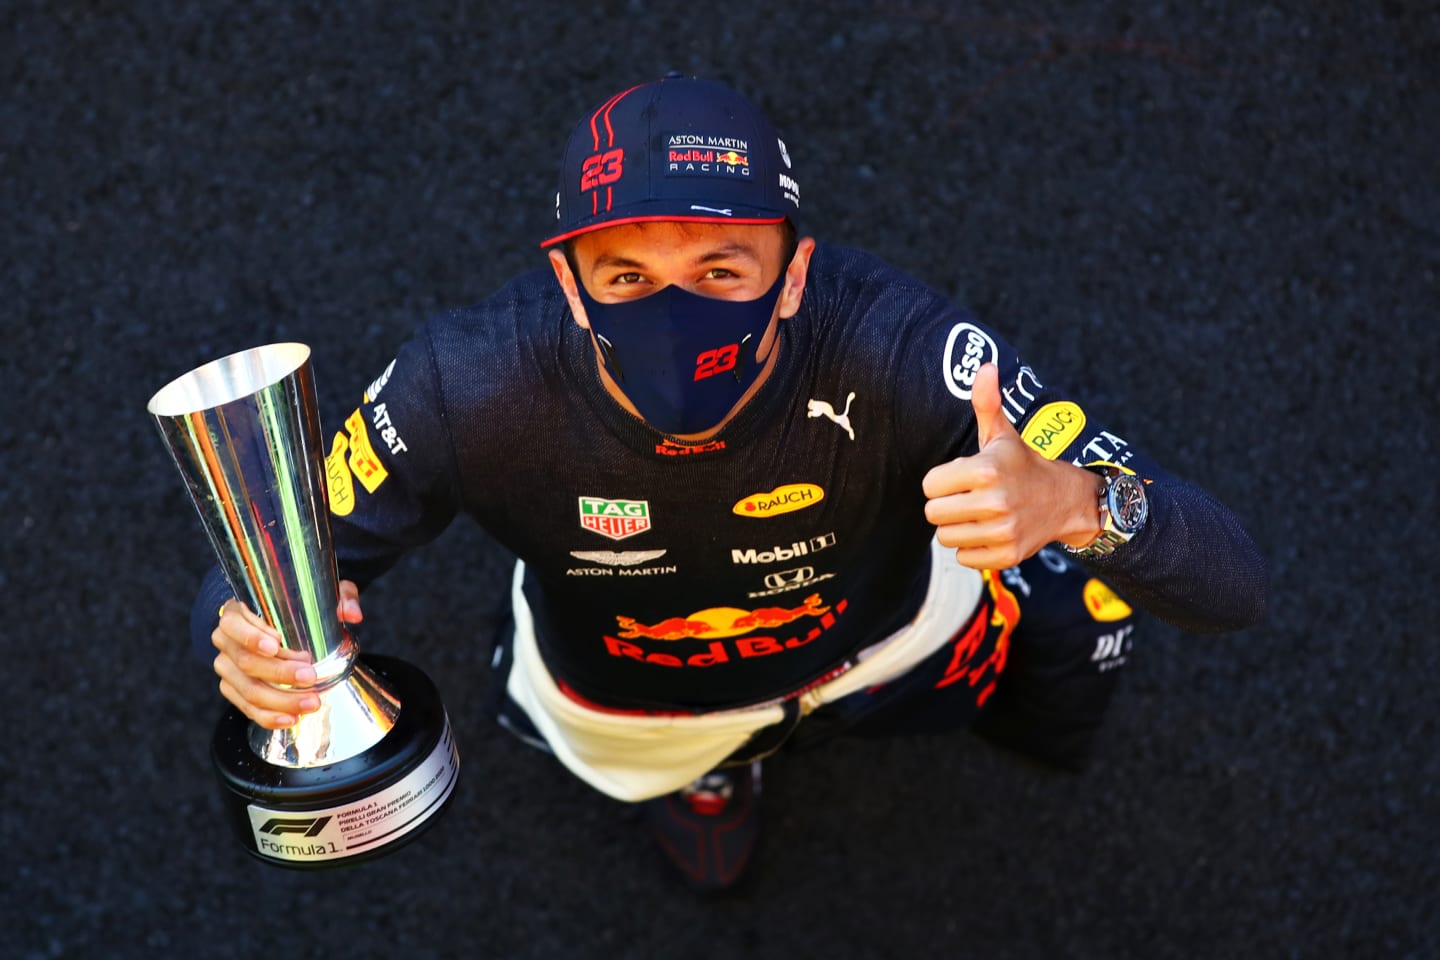 SCARPERIA, ITALY - SEPTEMBER 13: Third placed Alexander Albon of Thailand and Red Bull Racing celebrates after the F1 Grand Prix of Tuscany at Mugello Circuit on September 13, 2020 in Scarperia, Italy. (Photo by Mark Thompson/Getty Images)